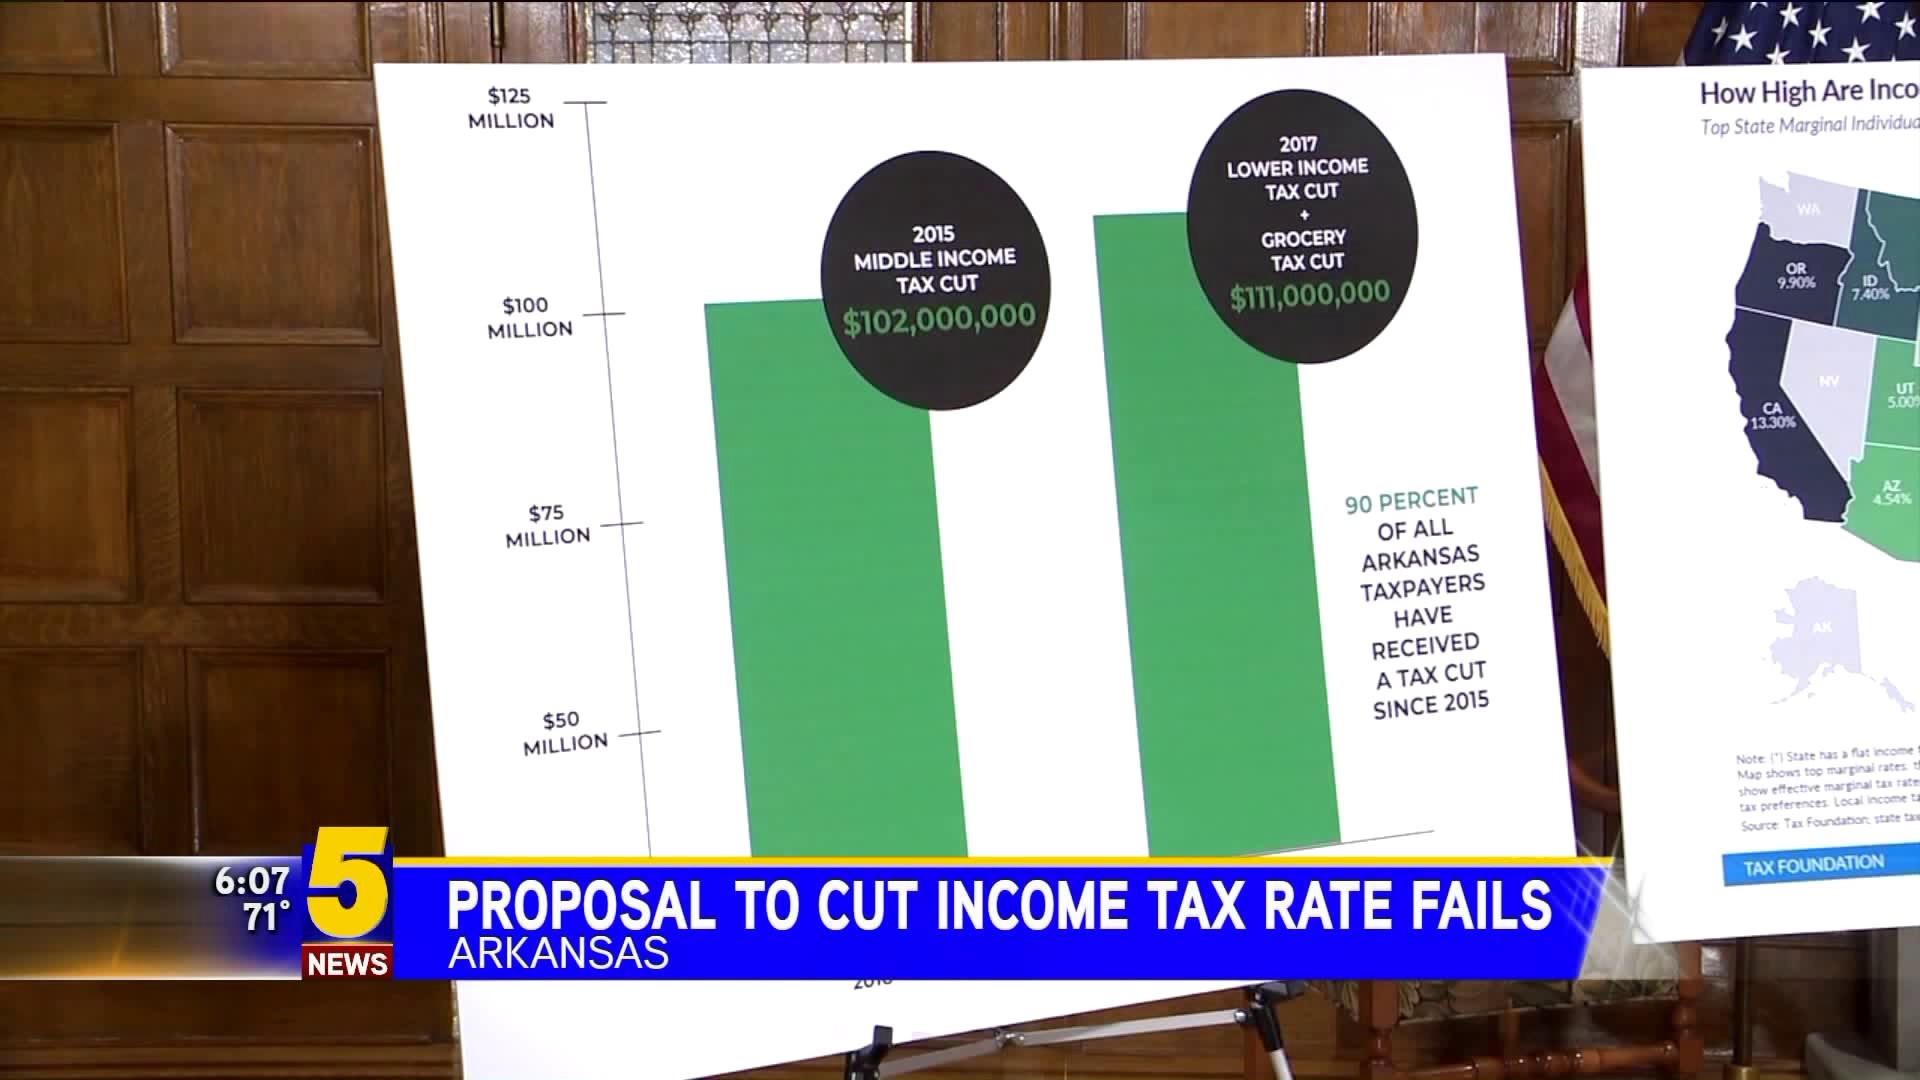 Proposal To Cut Income Tax Rate Fails in Arkansas